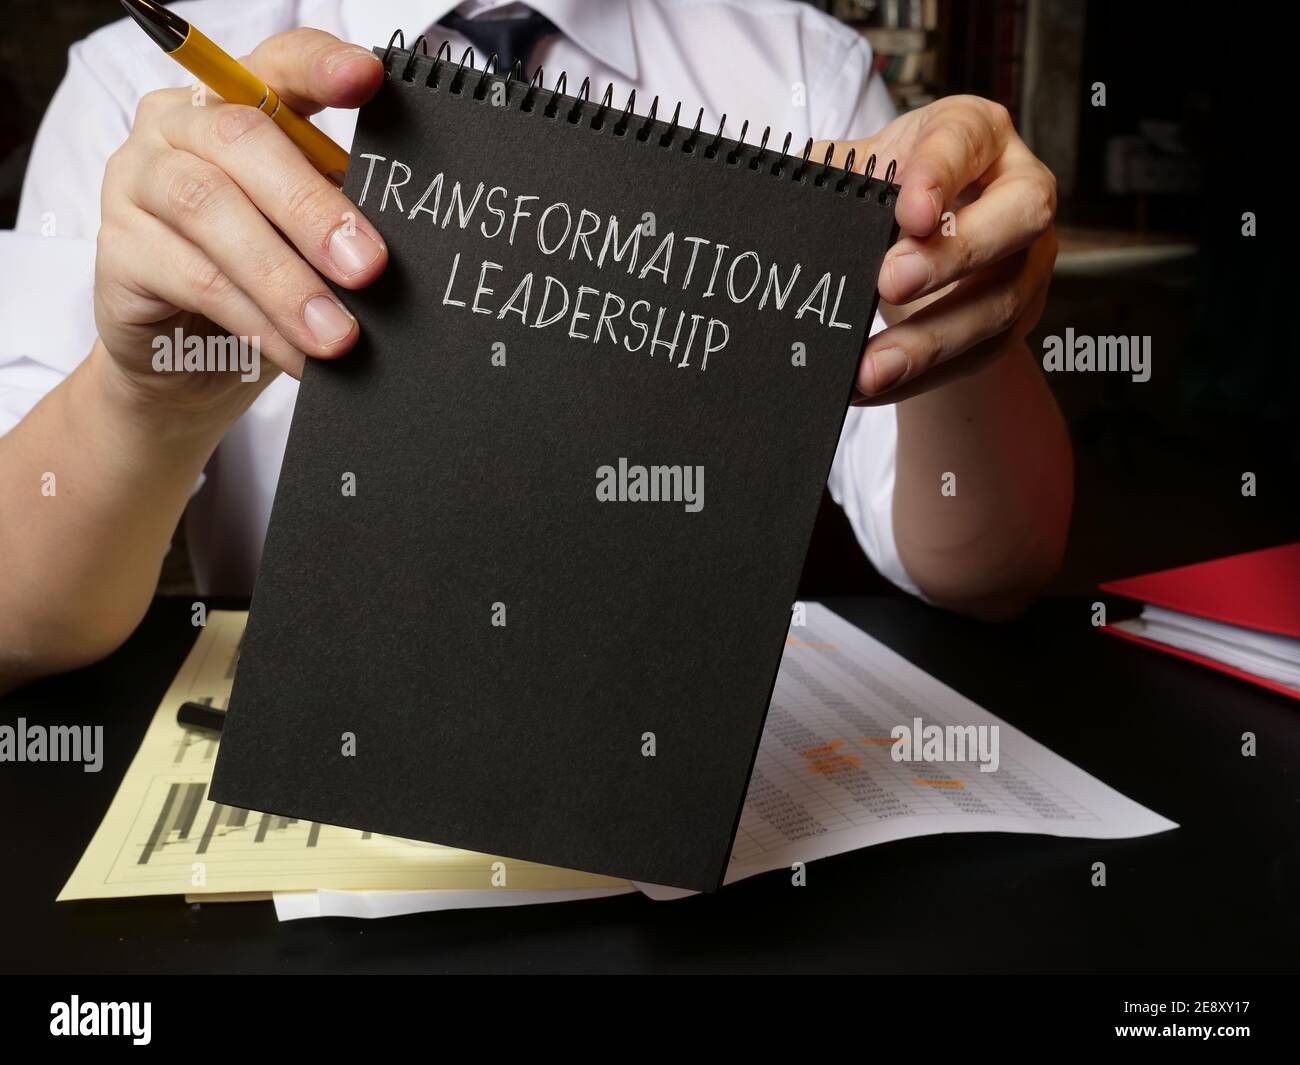 Manager holds info about Transformational leadership. Stock Photo